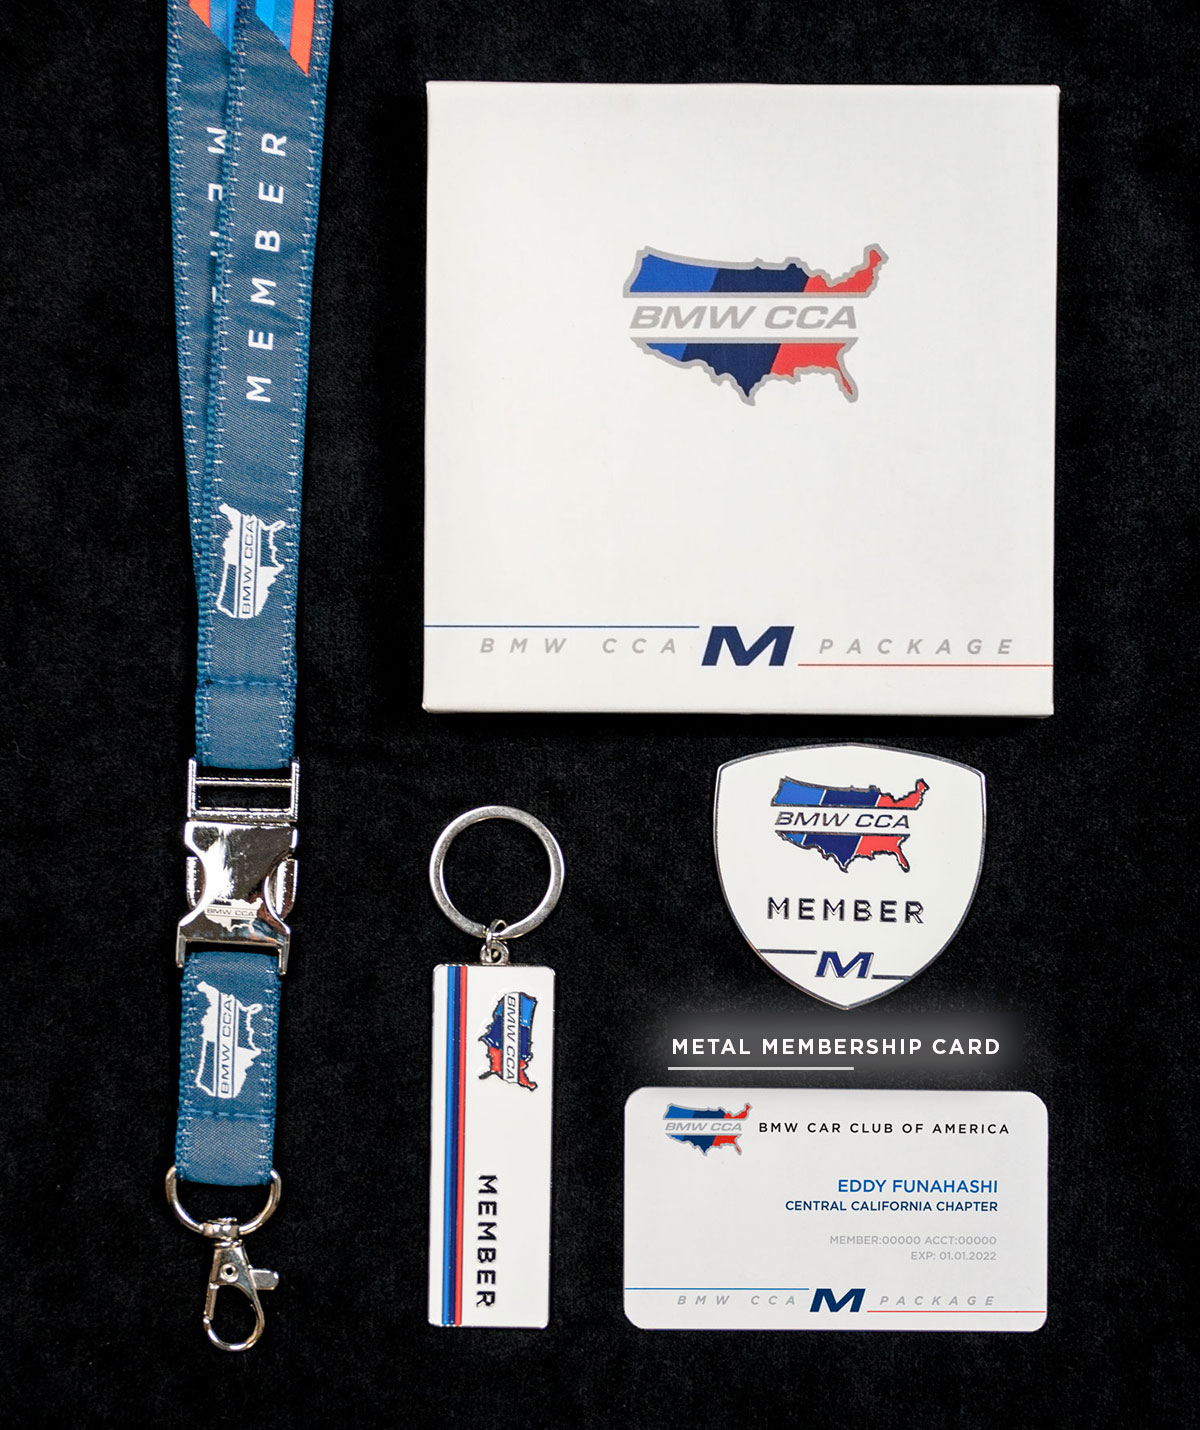 limited-edition-bmw-cca-m-package-set-with-metal-membership-card